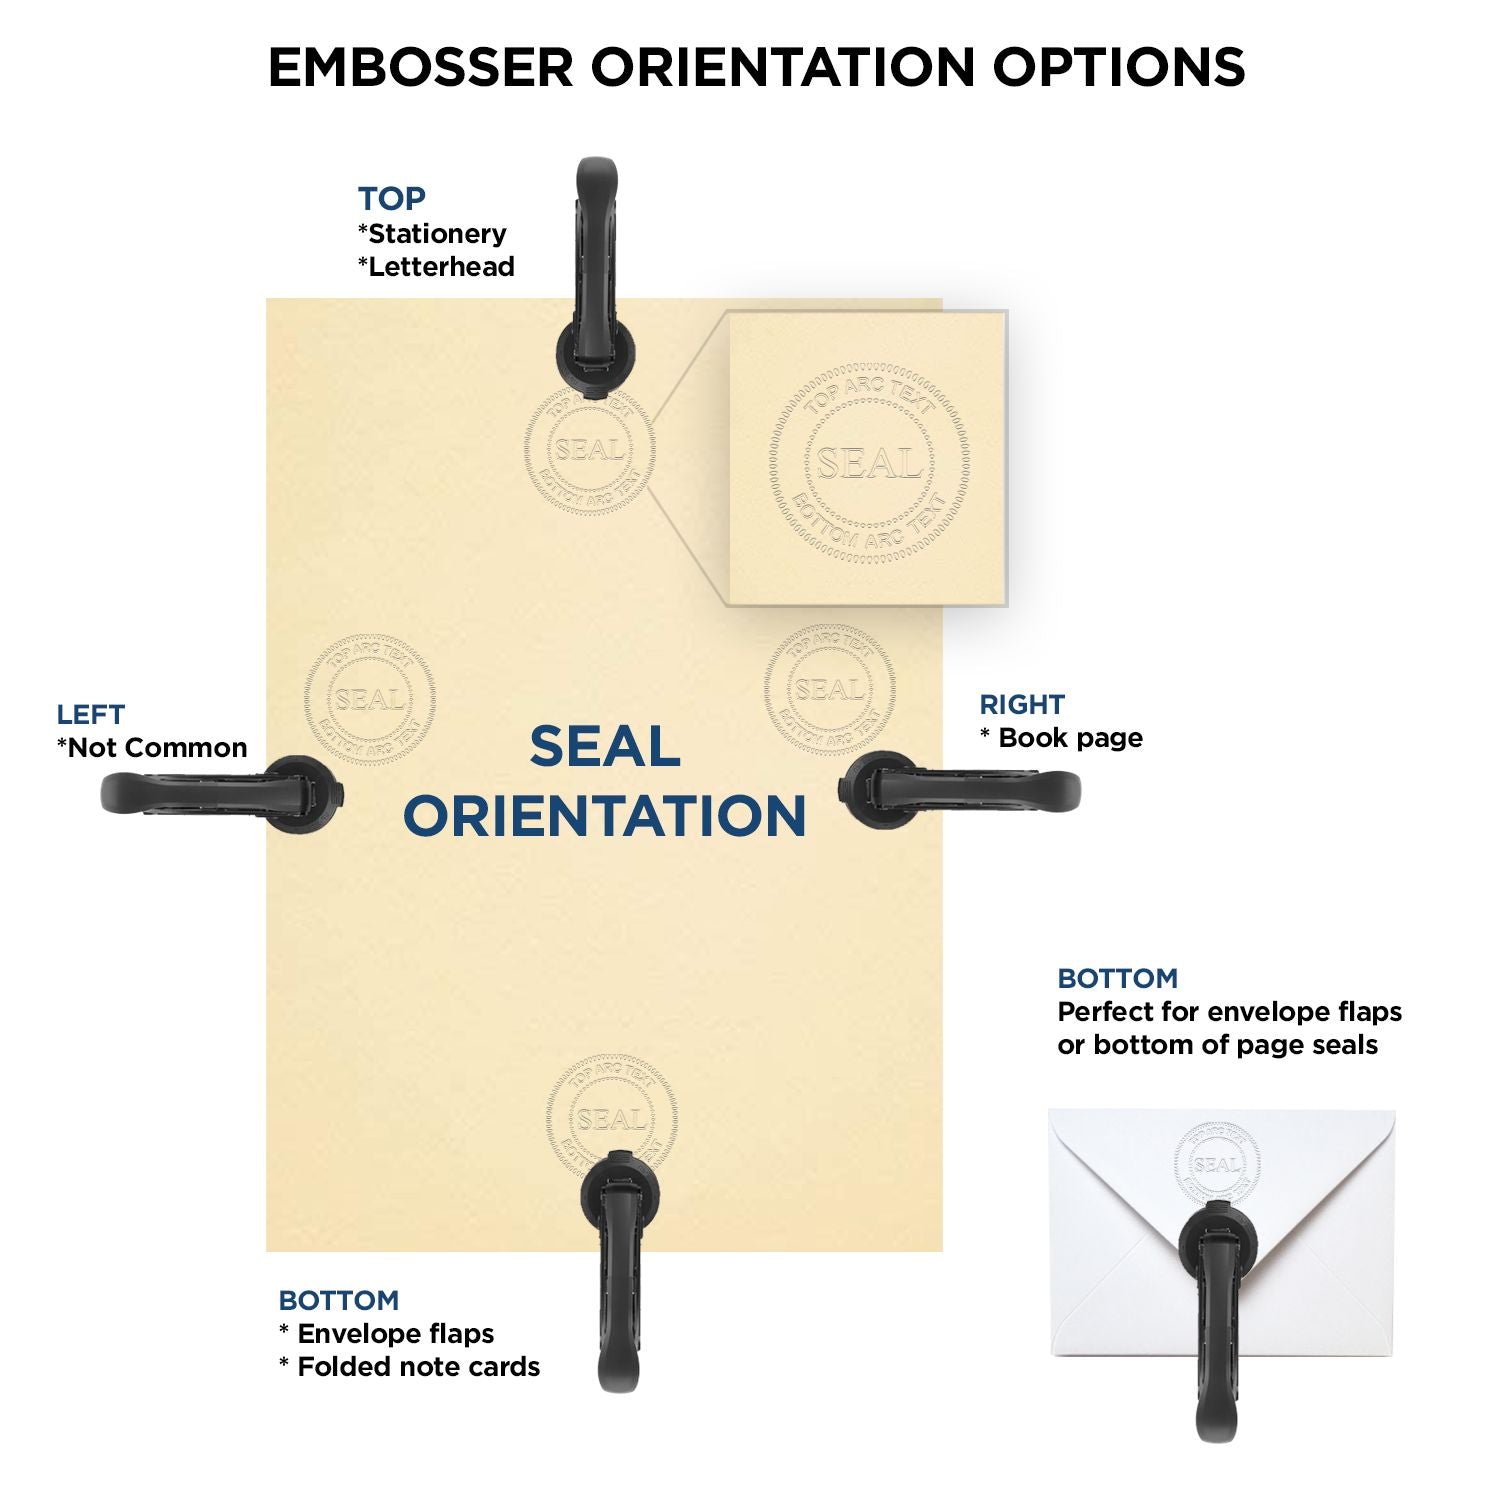 An infographic for the Handheld Colorado Professional Engineer Embosser showing embosser orientation, this is showing examples of a top, bottom, right and left insert.